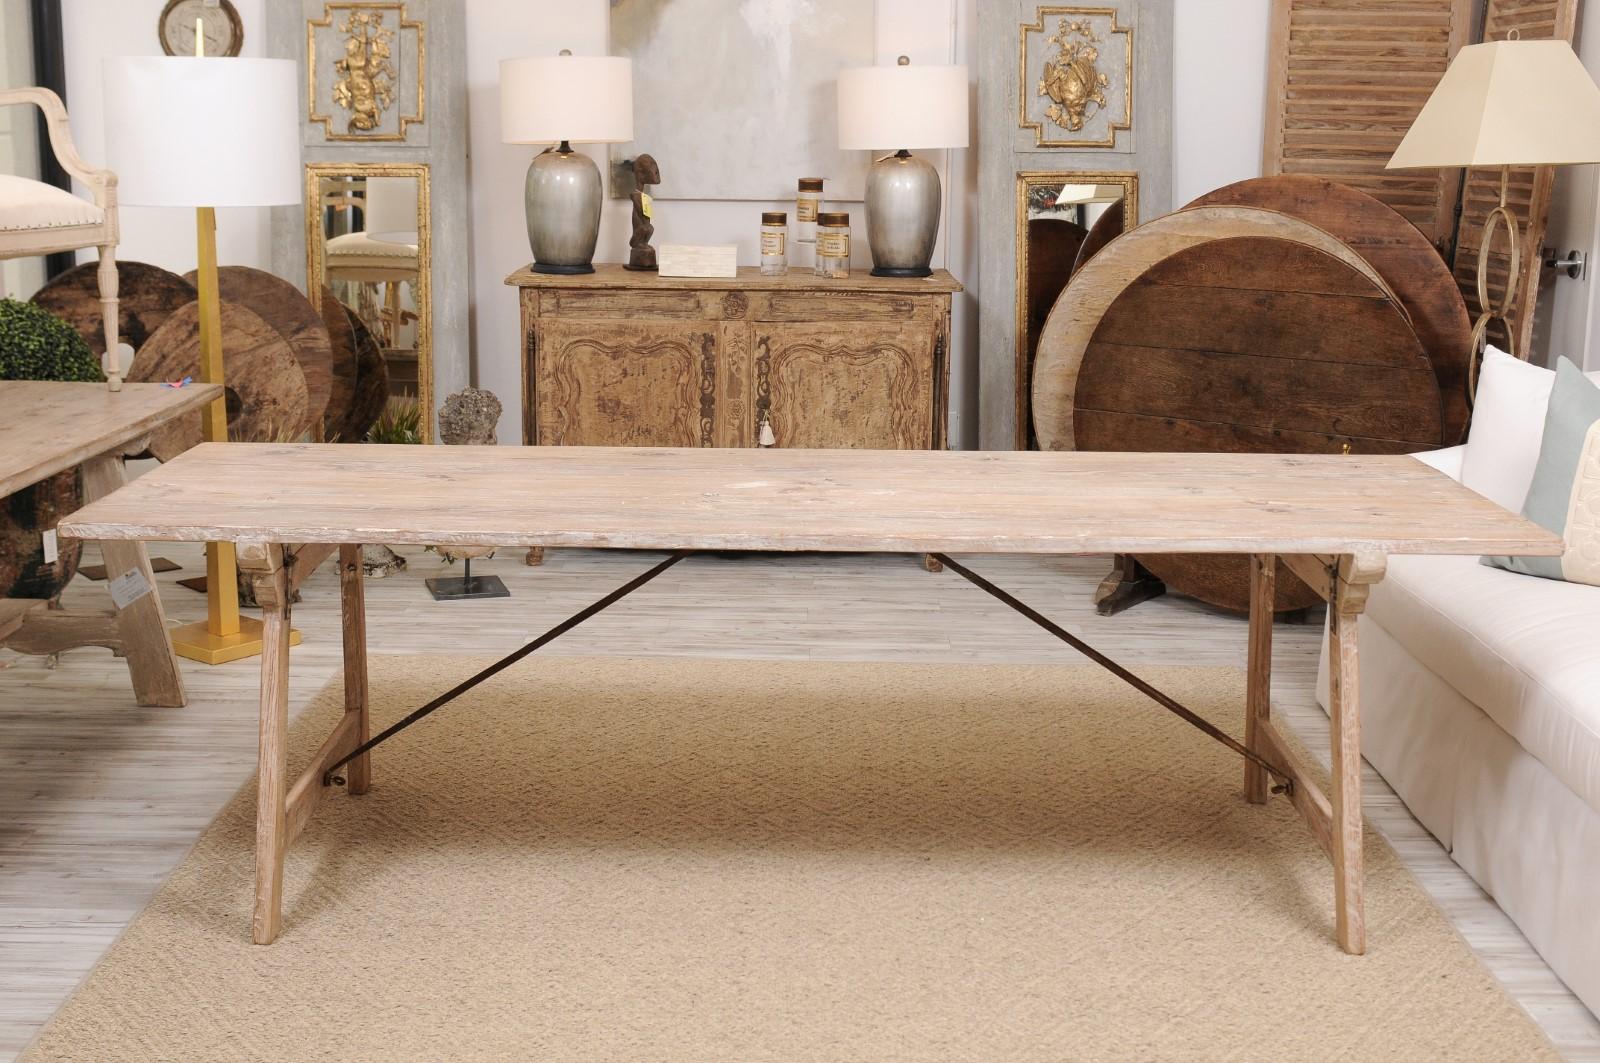 A Spanish Andalusian refinished long dining farm table from the 19th century with trestle base and iron stretcher. The clean and elegant lines of this old table caught our attention, and once we saw the graceful iron struts underneath, we were sold.